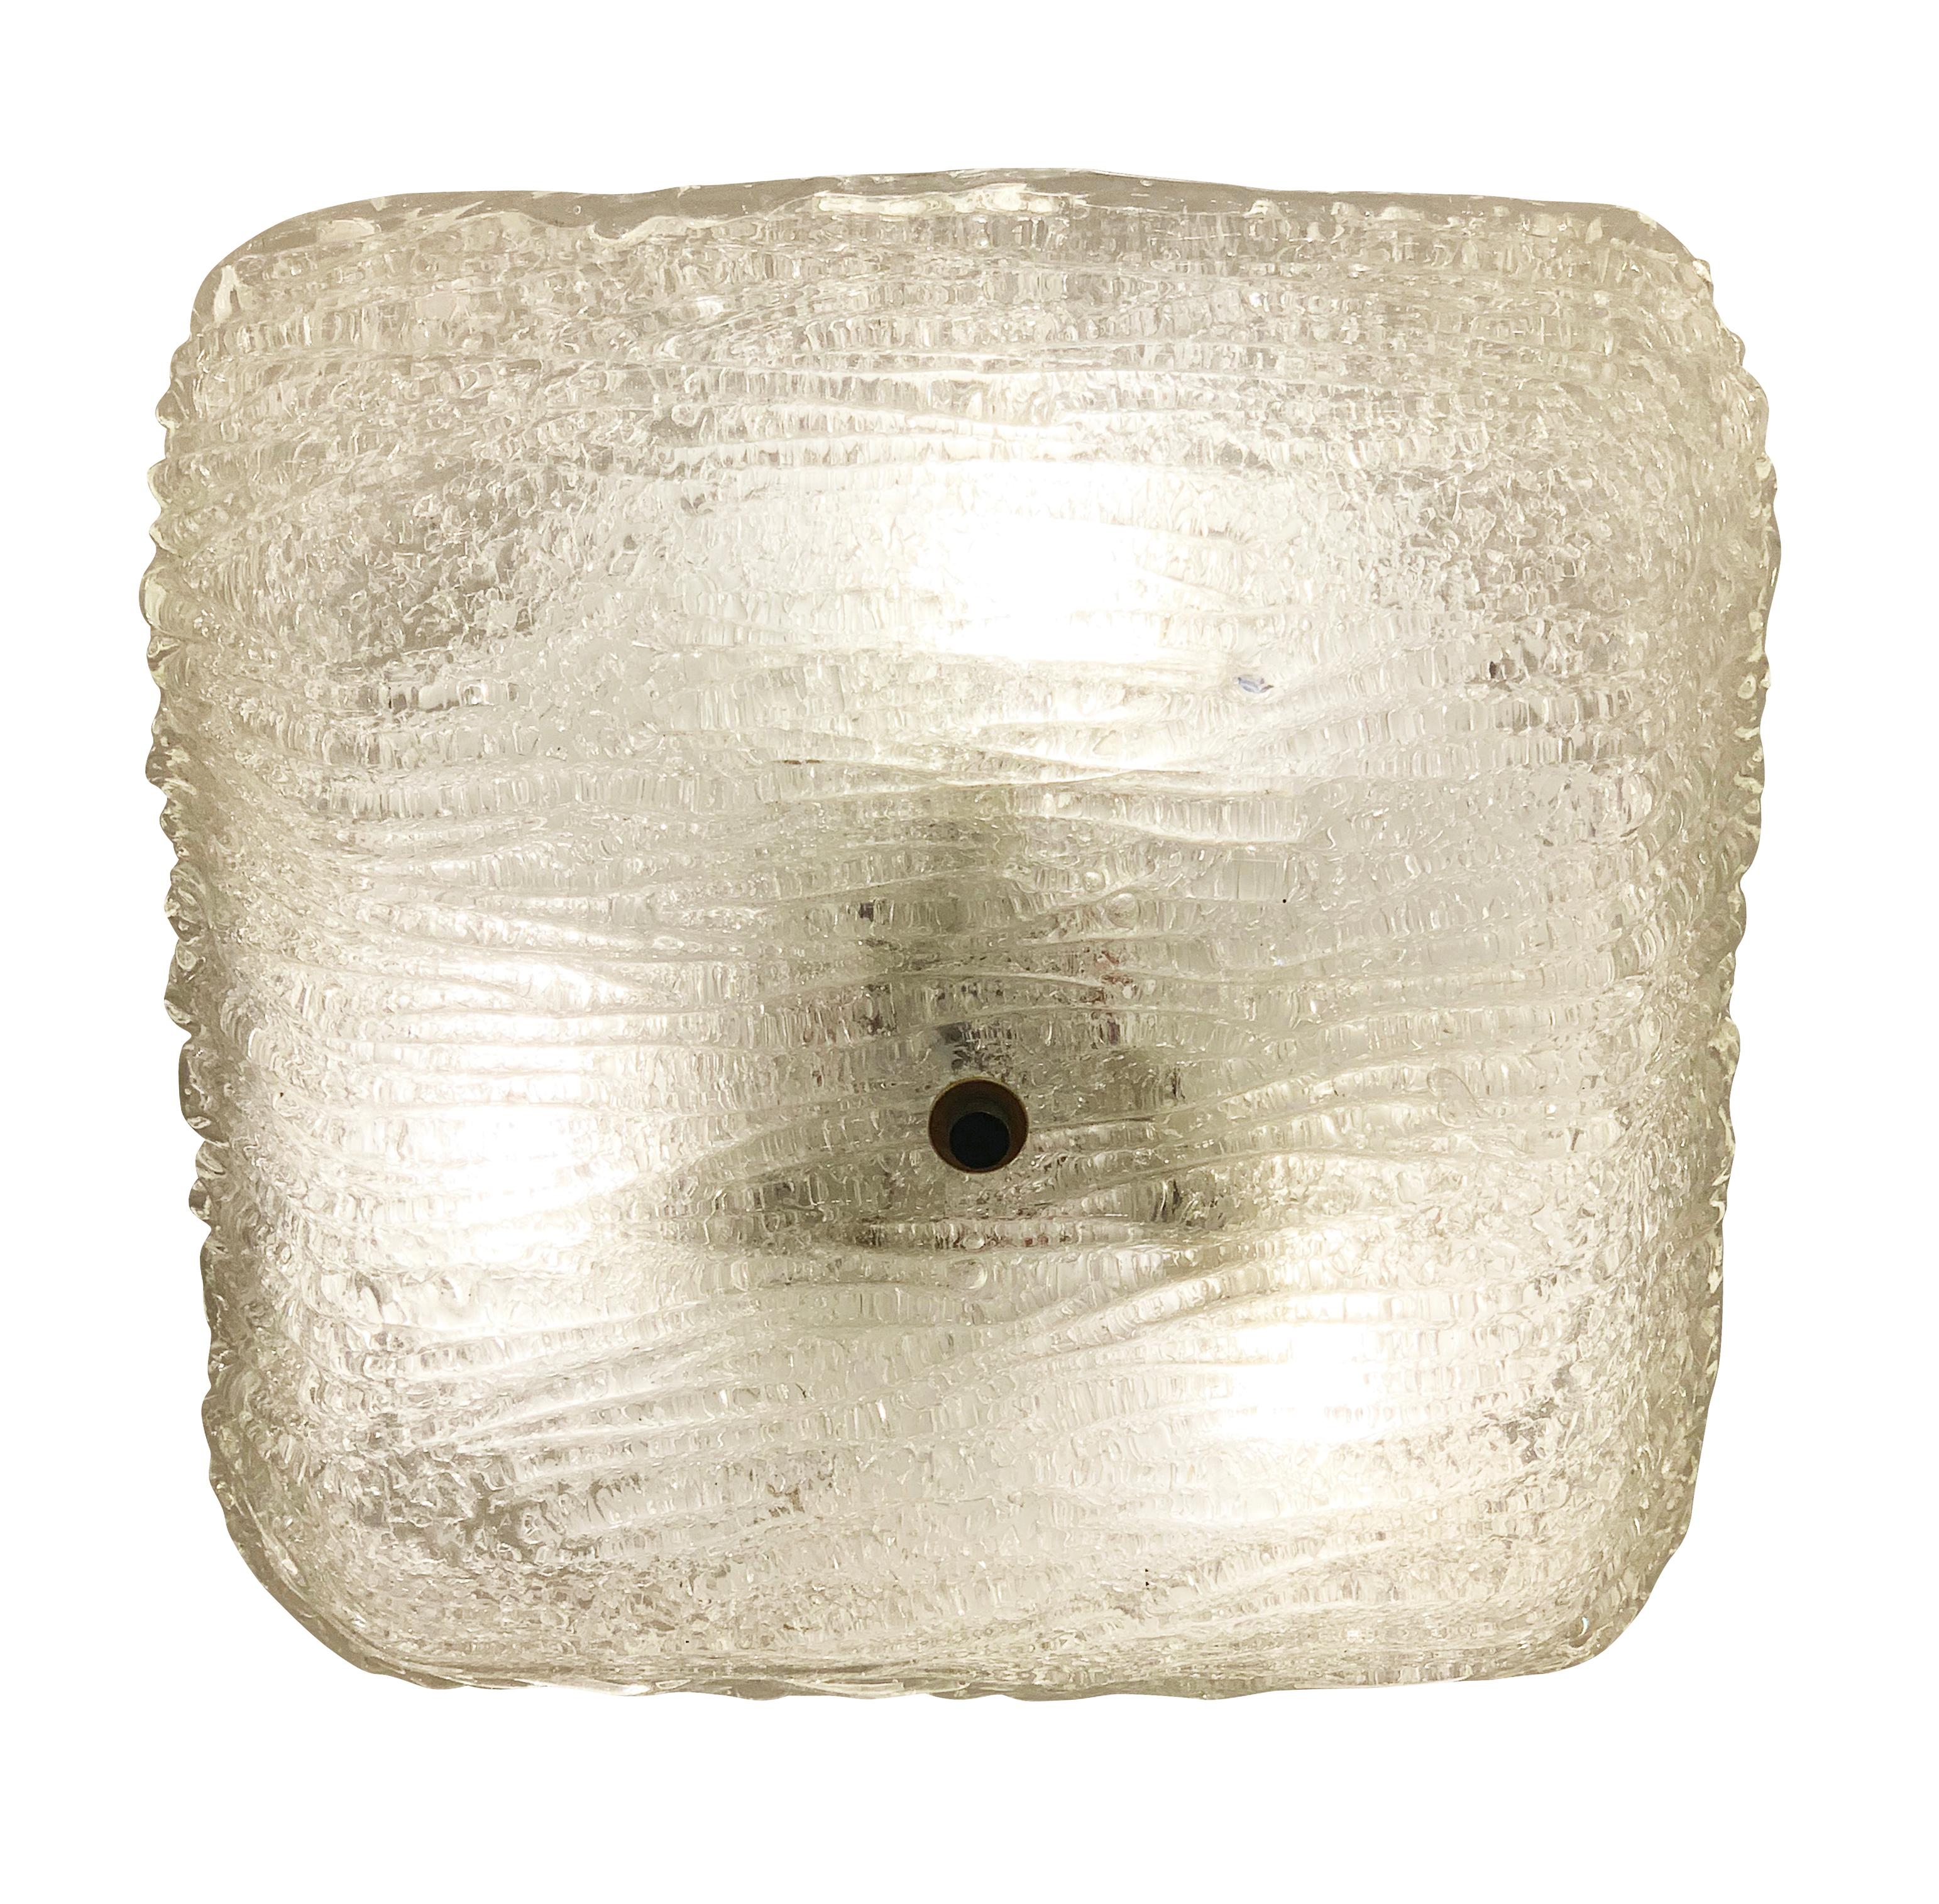 Square Italian Mid-Century flush mount made out of textured Murano glass. Holds three light sources.

Condition: Excellent vintage condition, minor wear consistent with age and use.

Width: 13”

Depth: 13”

Height: 3.5”

Ref#: LTZ2007